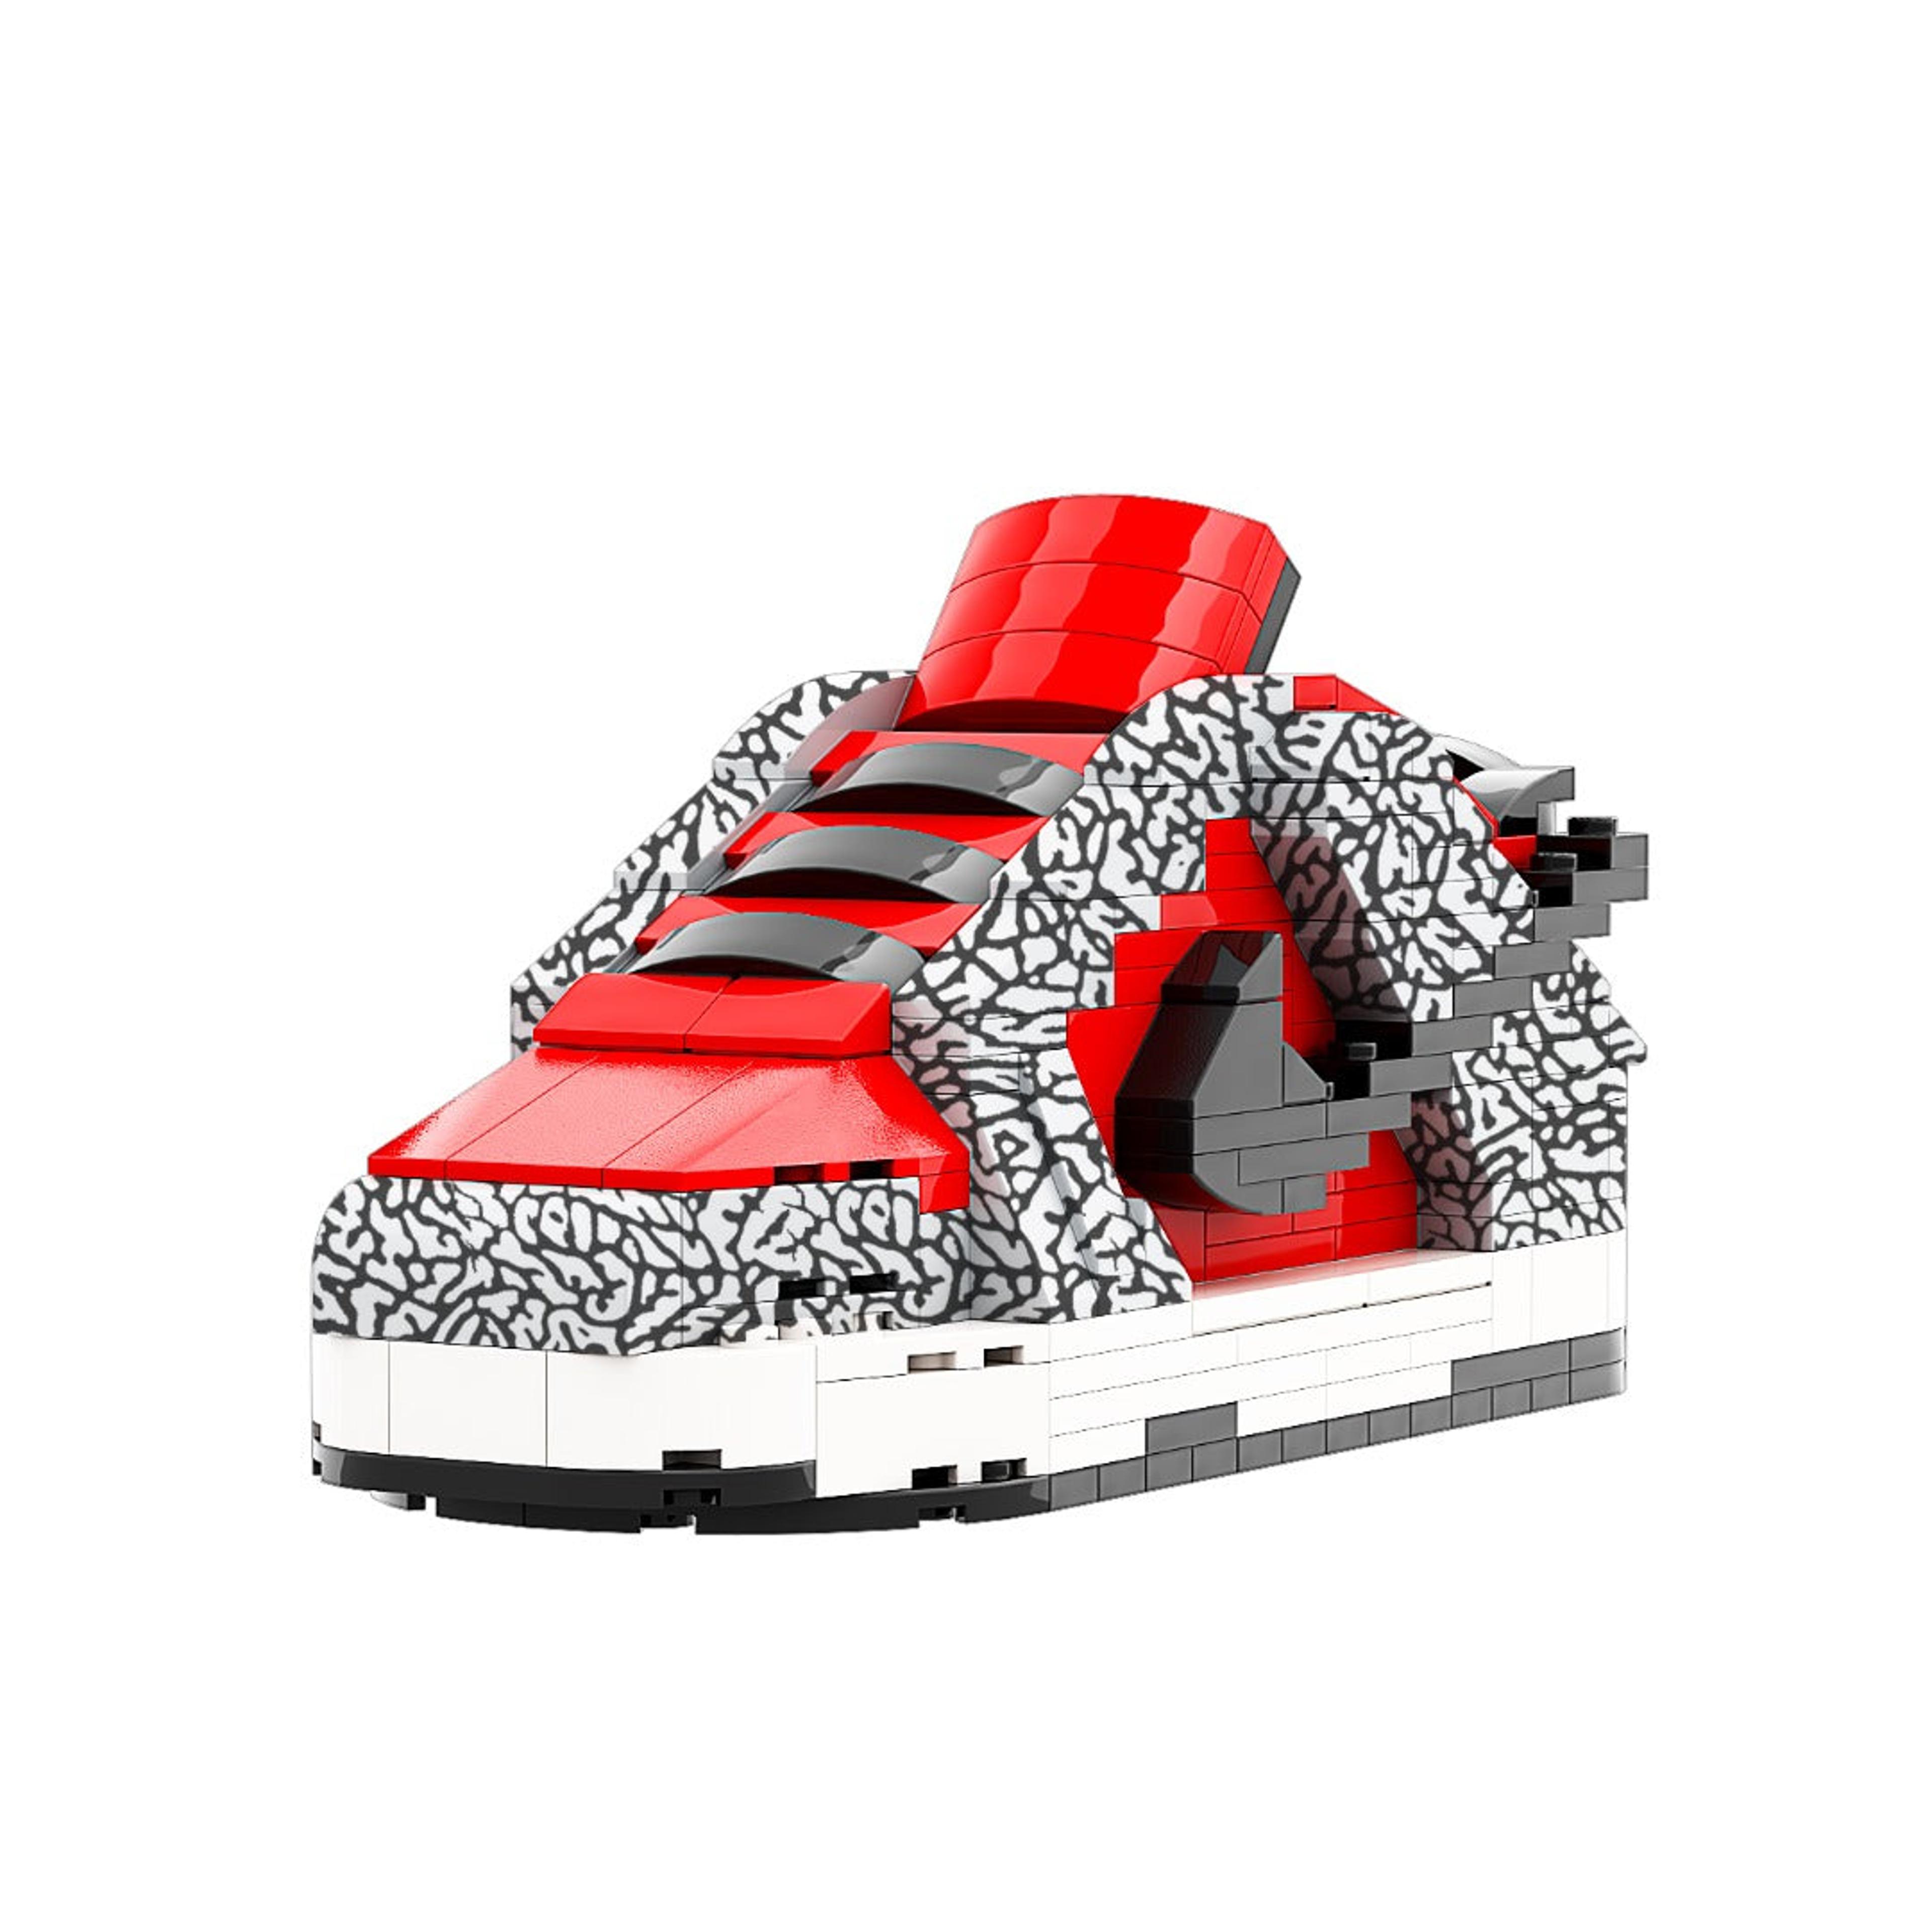 Alternate View 2 of REGULAR SB Dunk SUP "Red Cement" Sneaker Bricks with Mini Figure